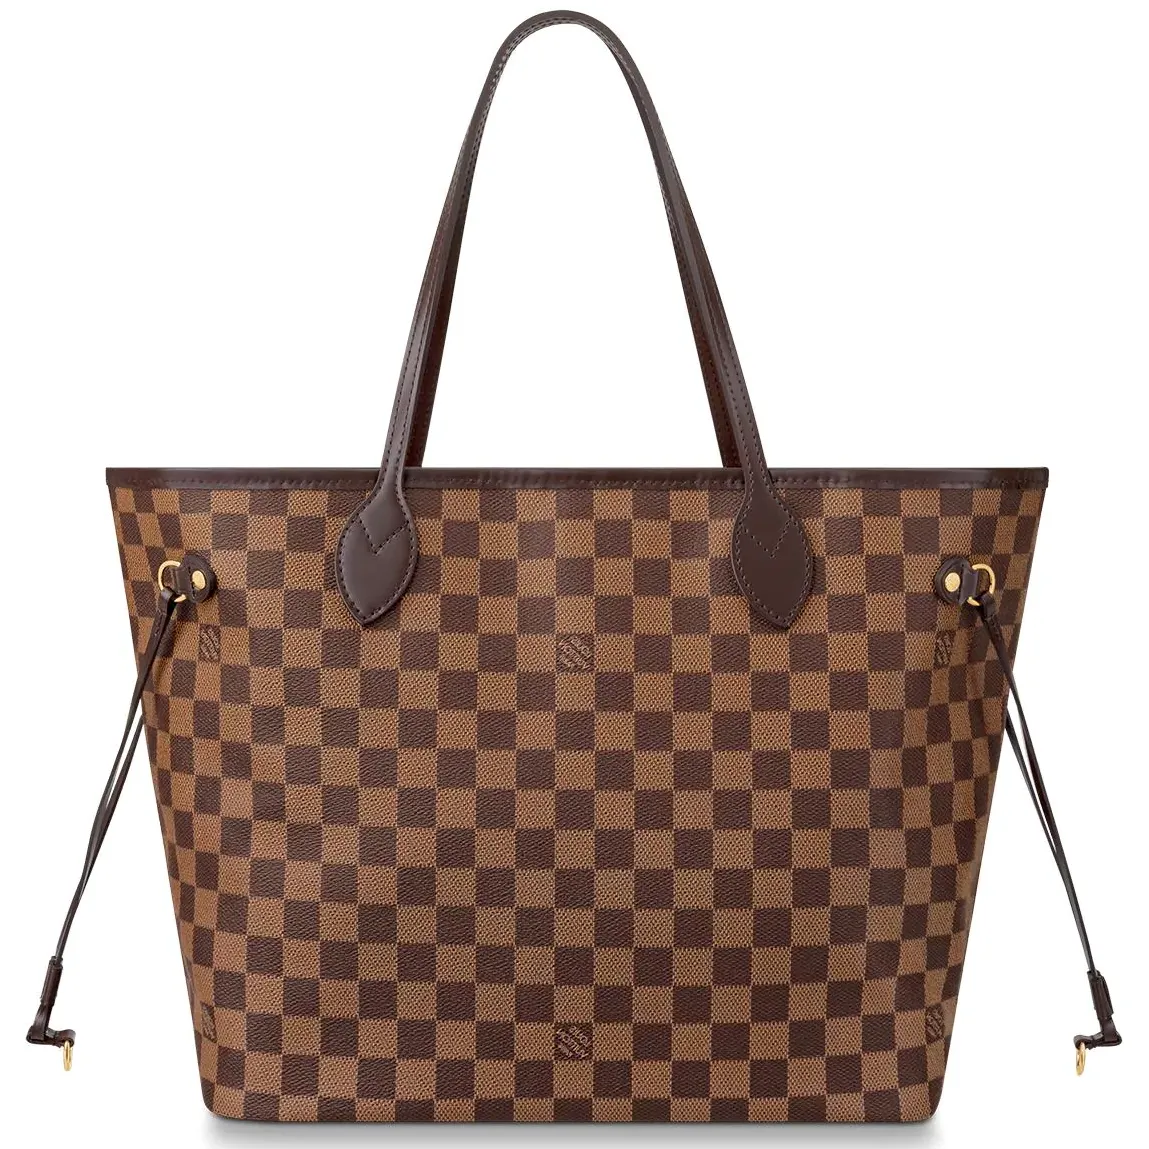 Free Louis Vuitton Bag Worth £1,400 For Winners